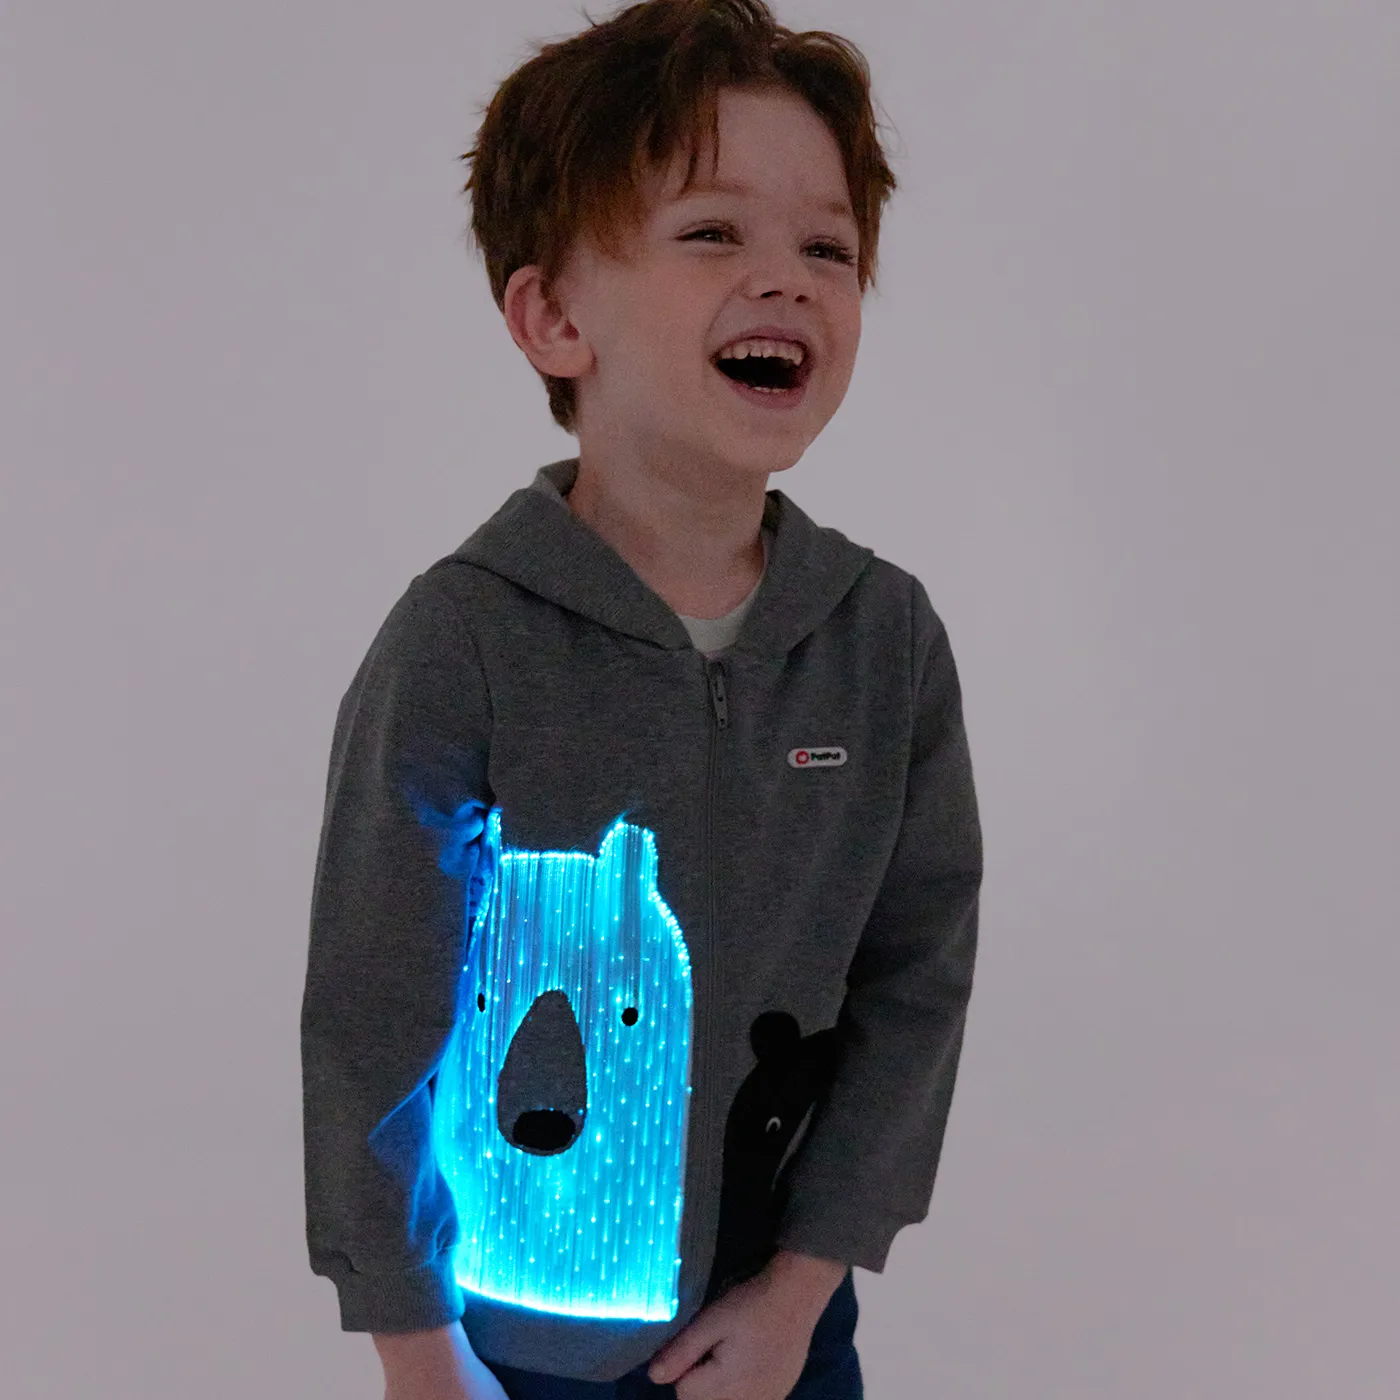 Go-Glow Illuminating Jacket with Light Up White Bear Including Controller (Built-In Battery)